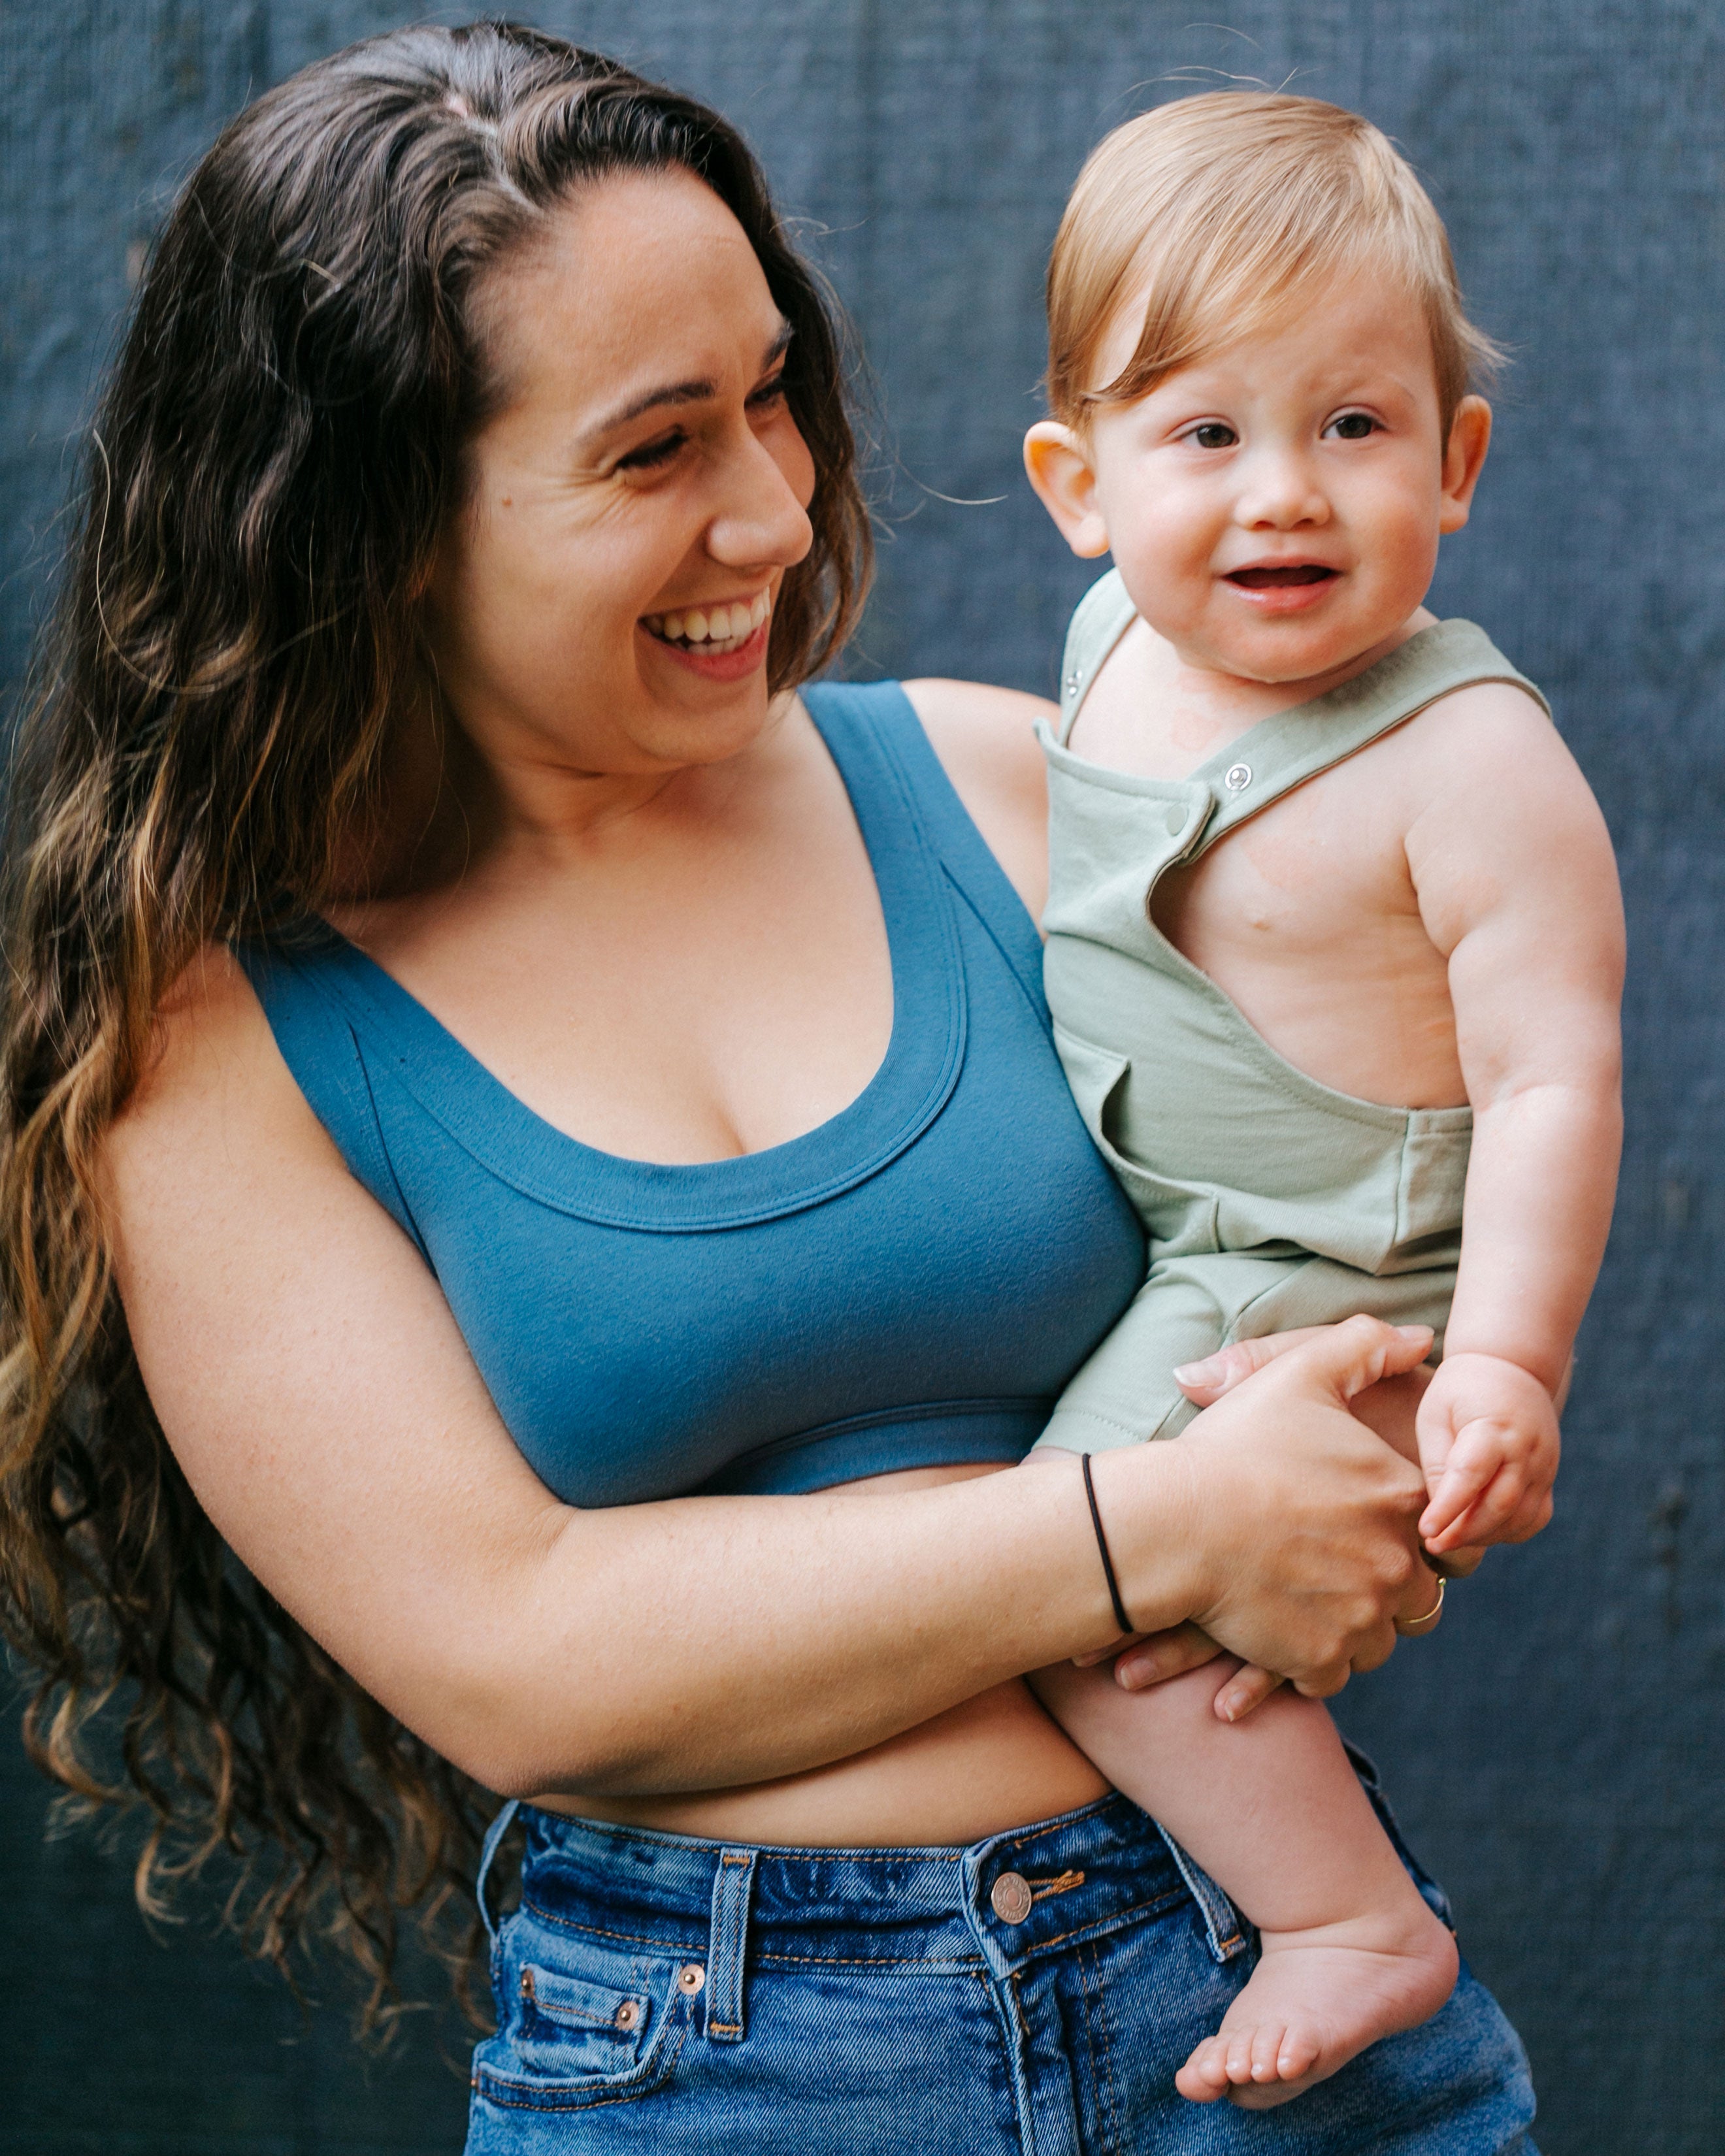 Smiling model holding her baby while wearing the Bralette in Stormy Blue and jeans.